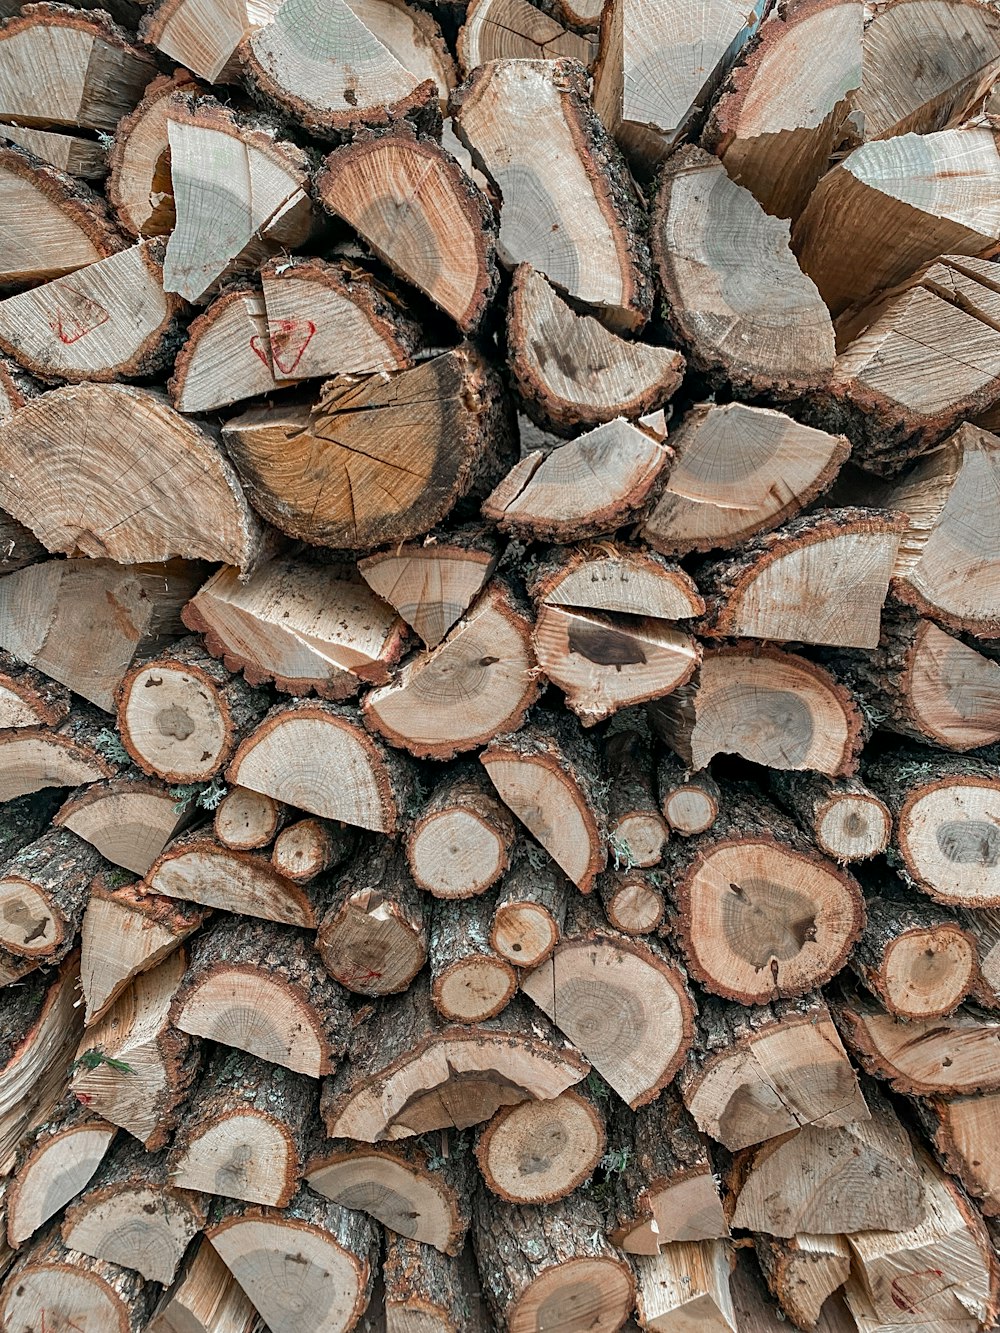 a pile of cut wood sitting next to each other